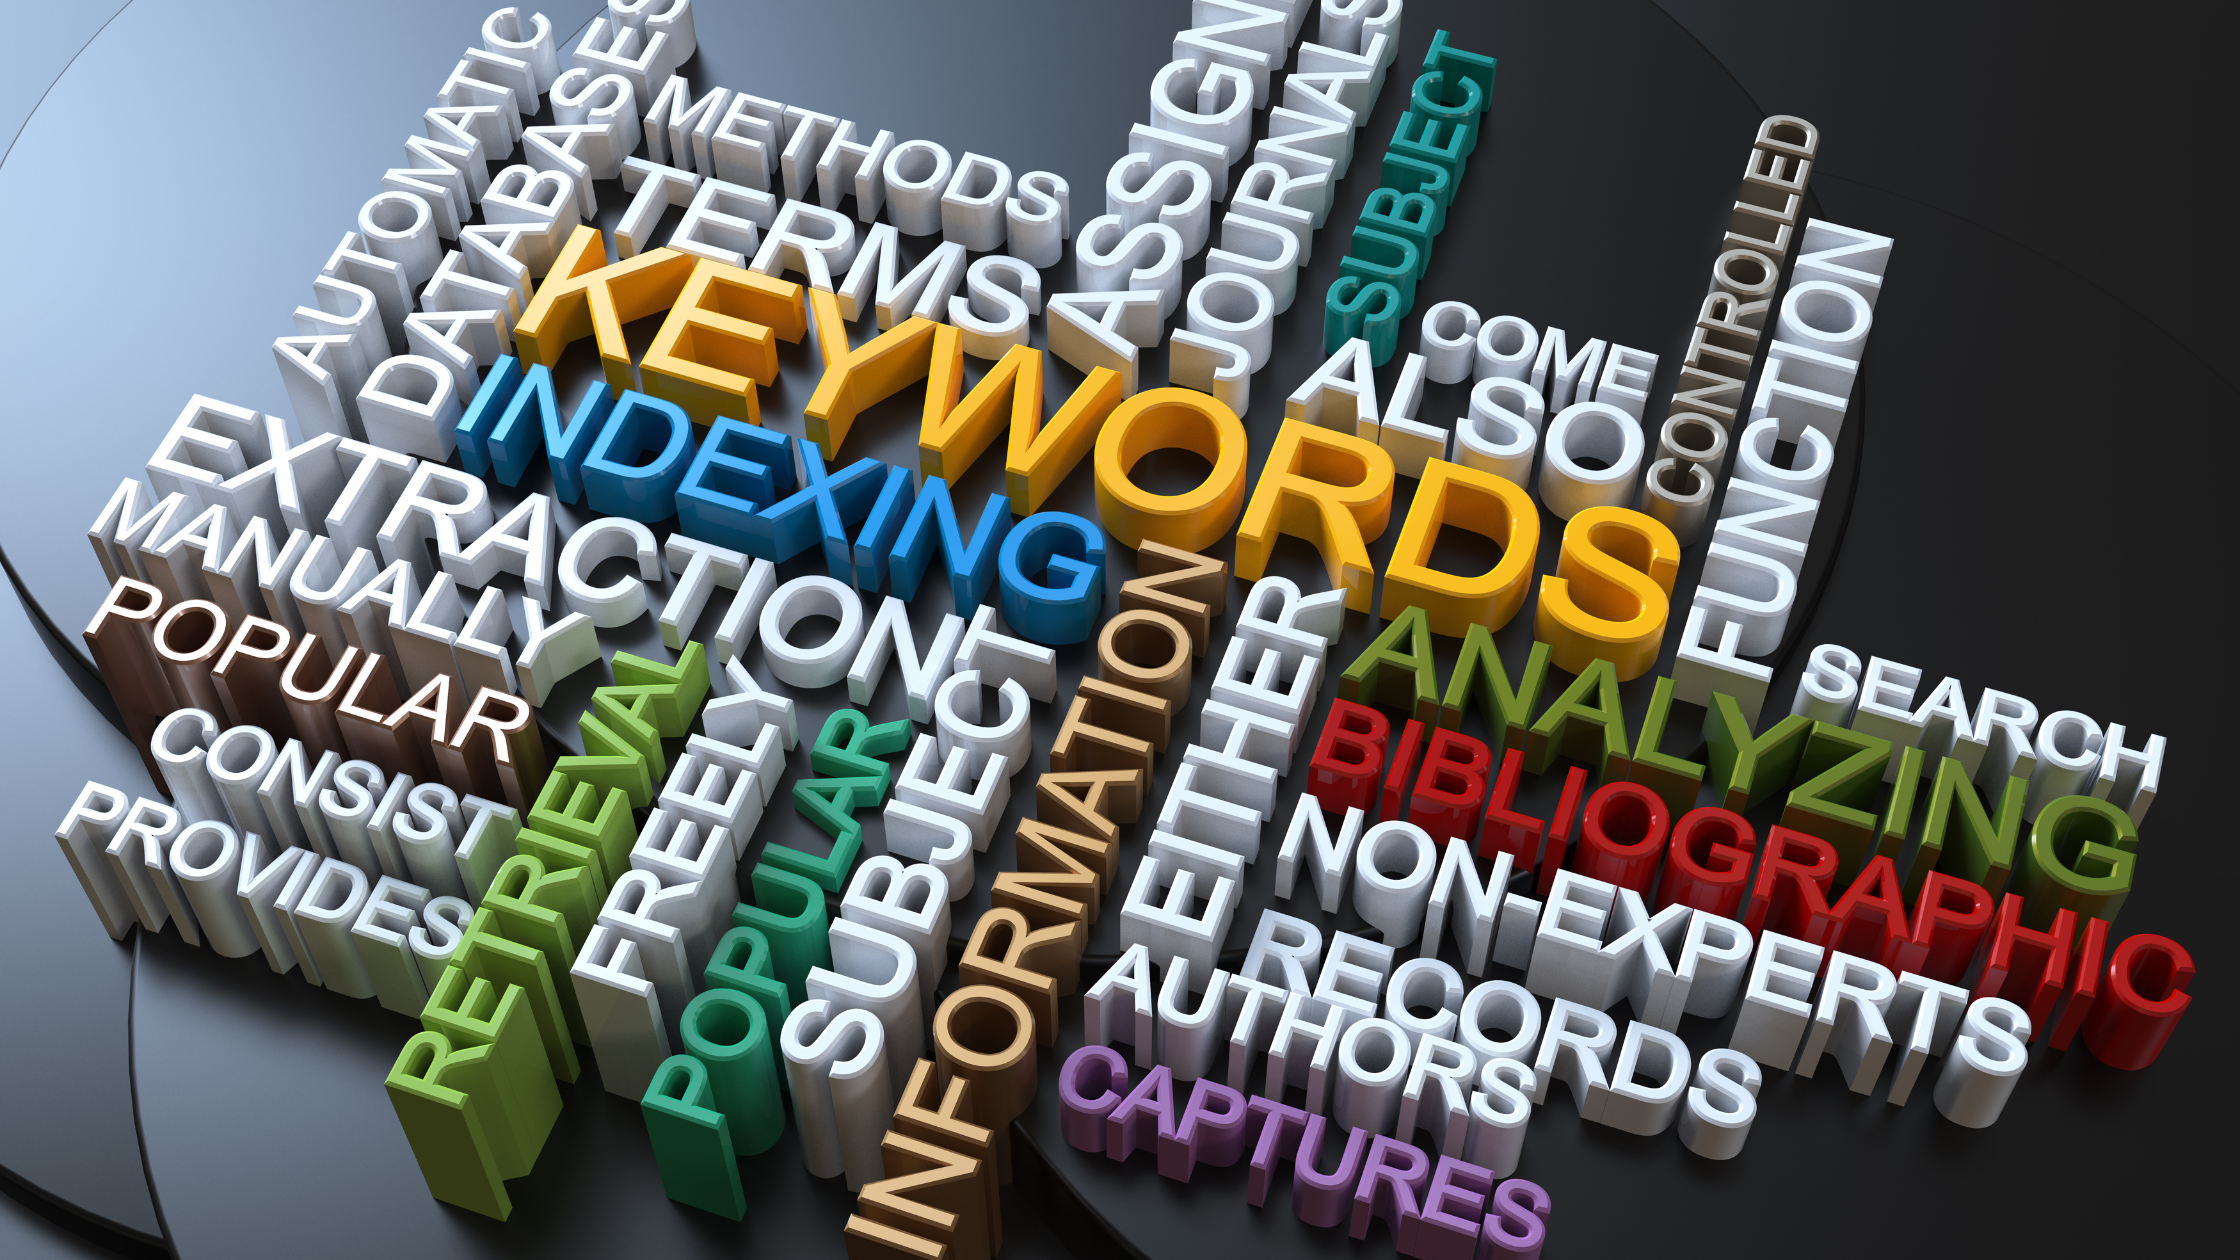 Targeting the Right Keywords